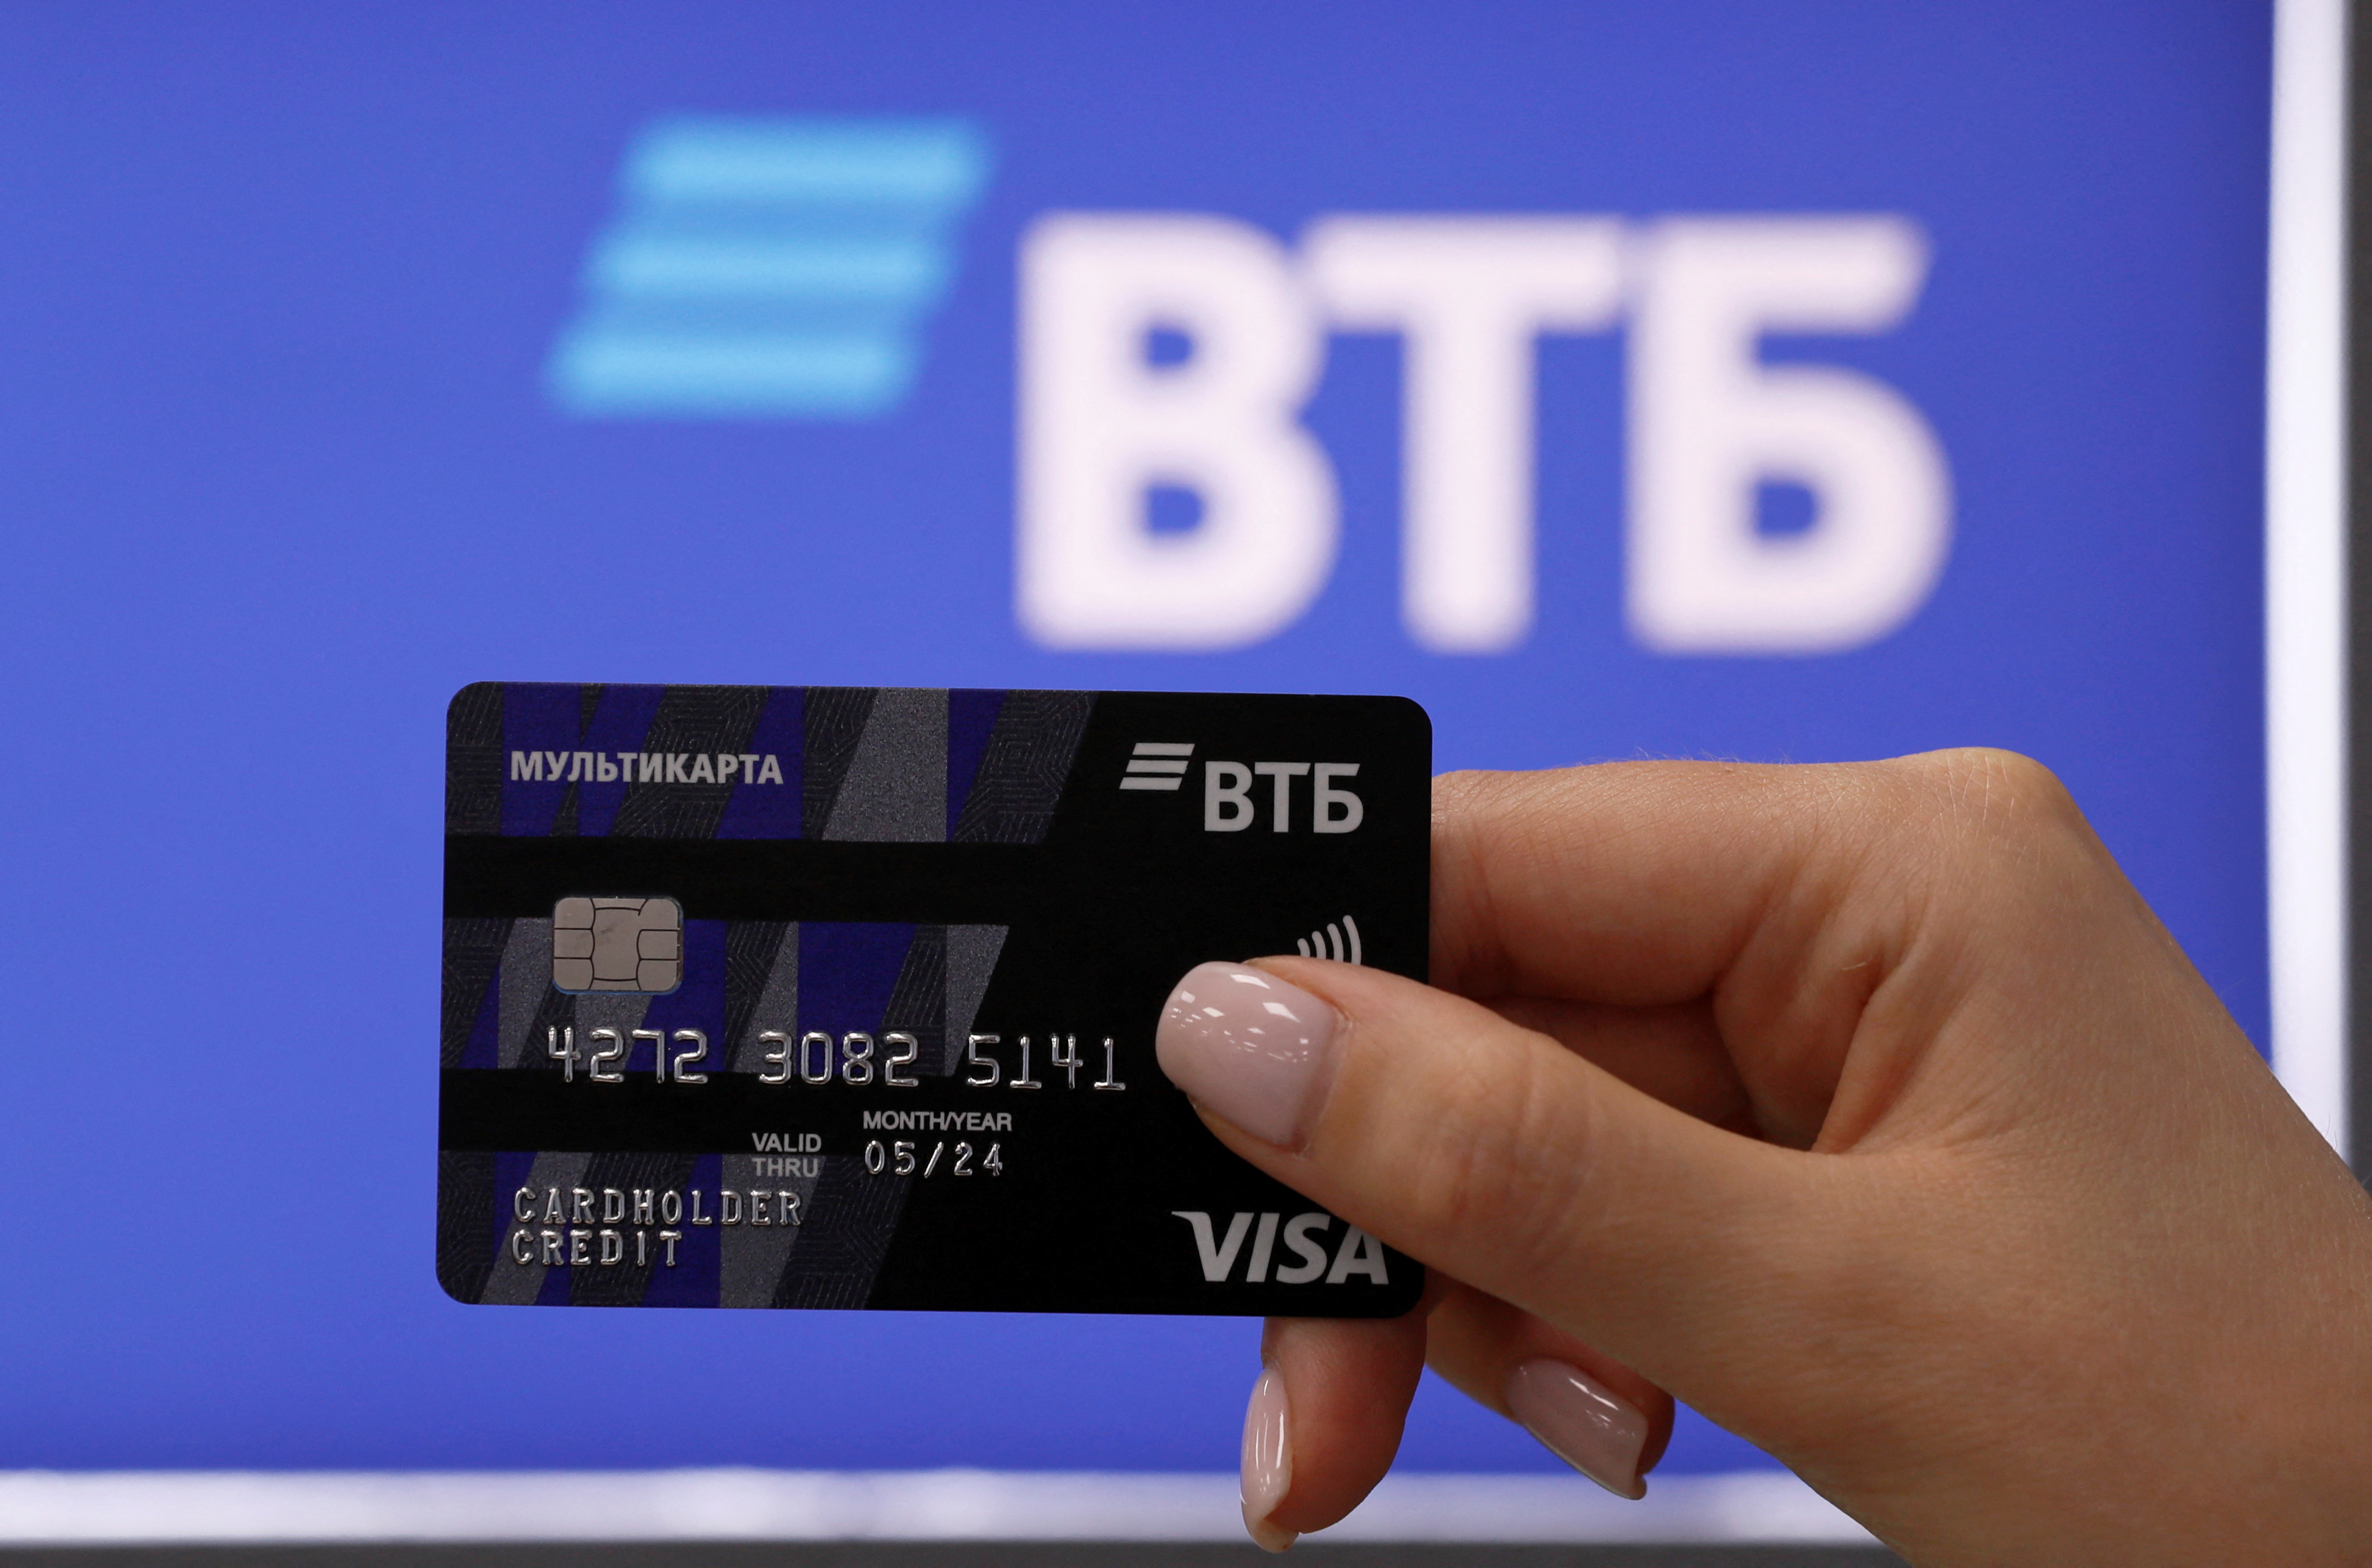 An employee demonstrates a payment card at a branch of VTB bank in Moscow